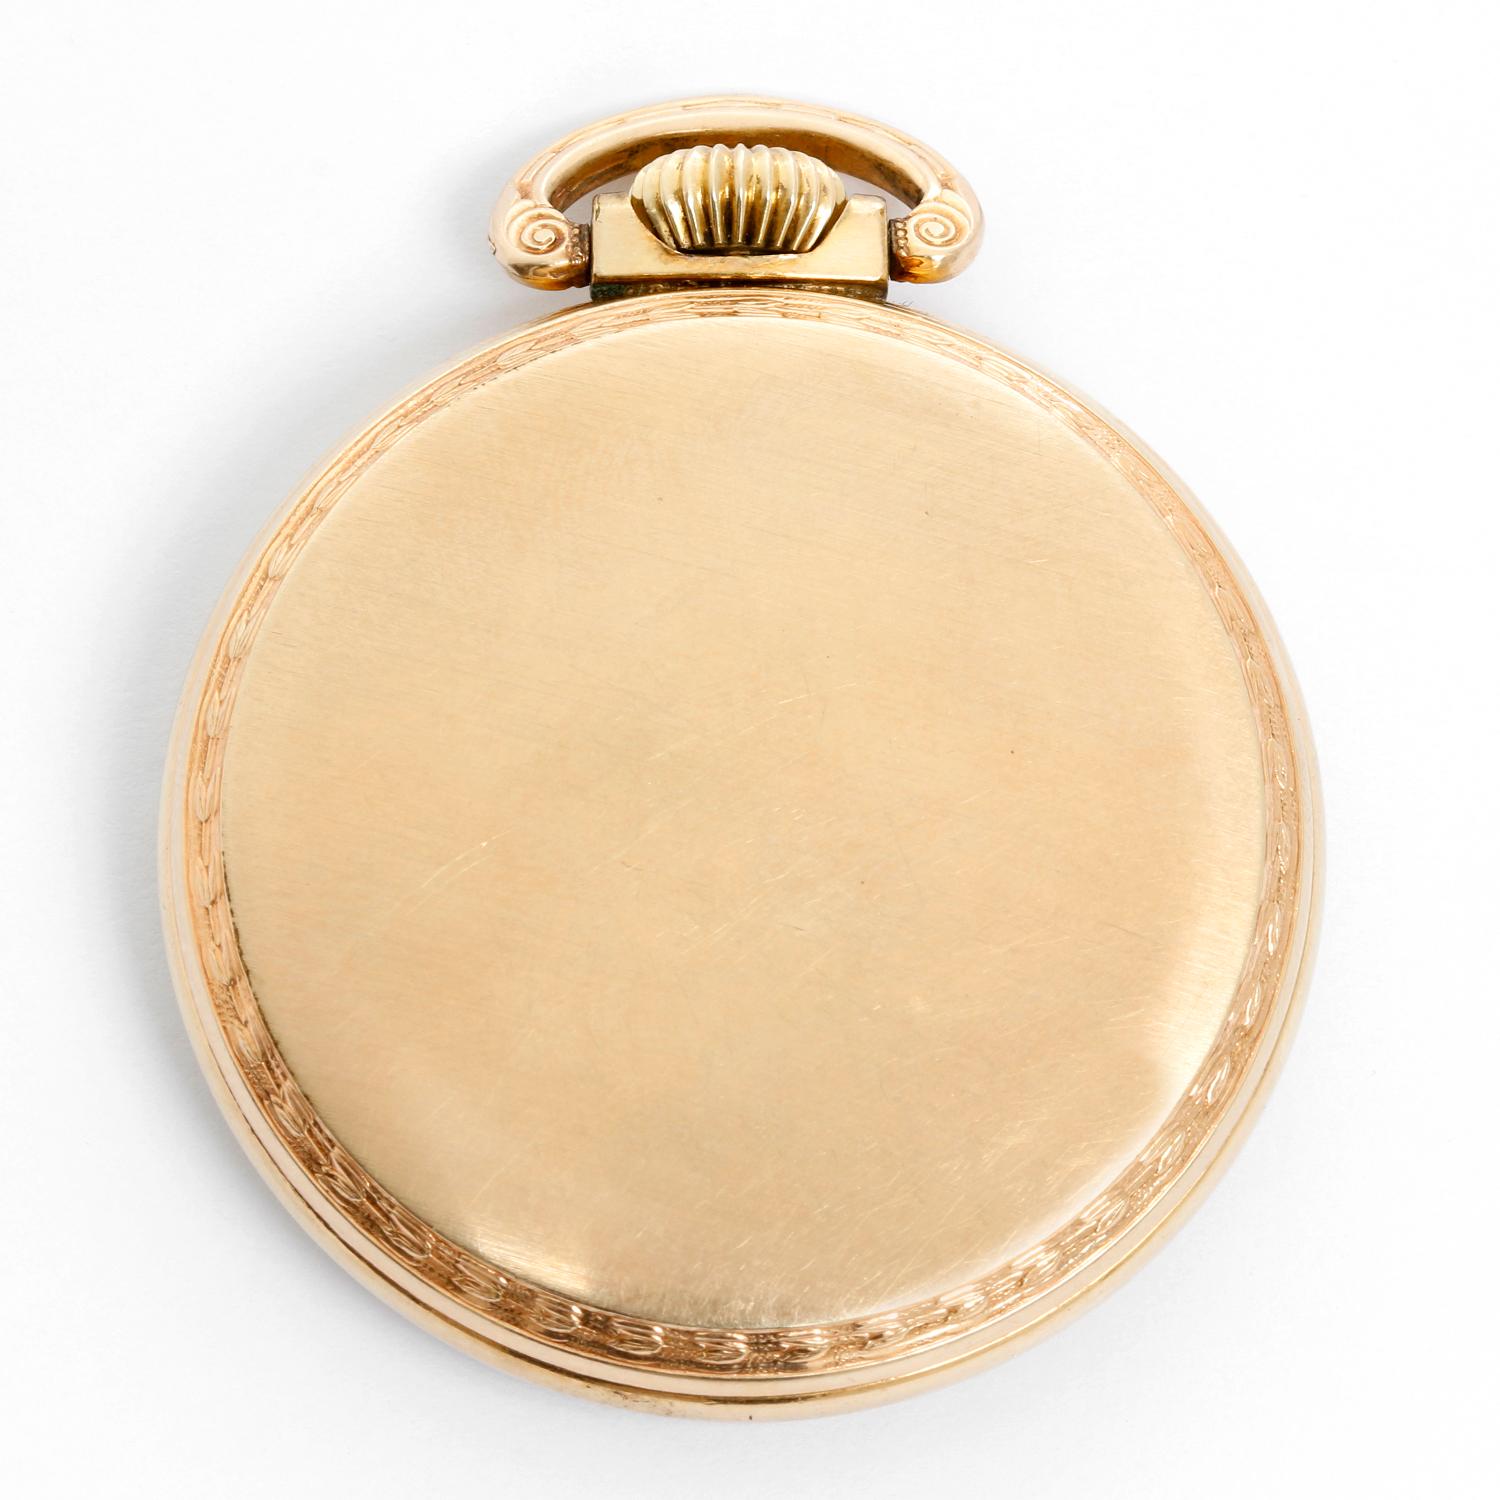 Elgin Pocket Watch - Manual. Gold filled. White enamel single sunk dial with Arabic numerals. Manual winding; 21 jewels. Gold filled . White enamel single sunk dial with Arabic numerals . Pre-owned with custom box. Railroad approved..